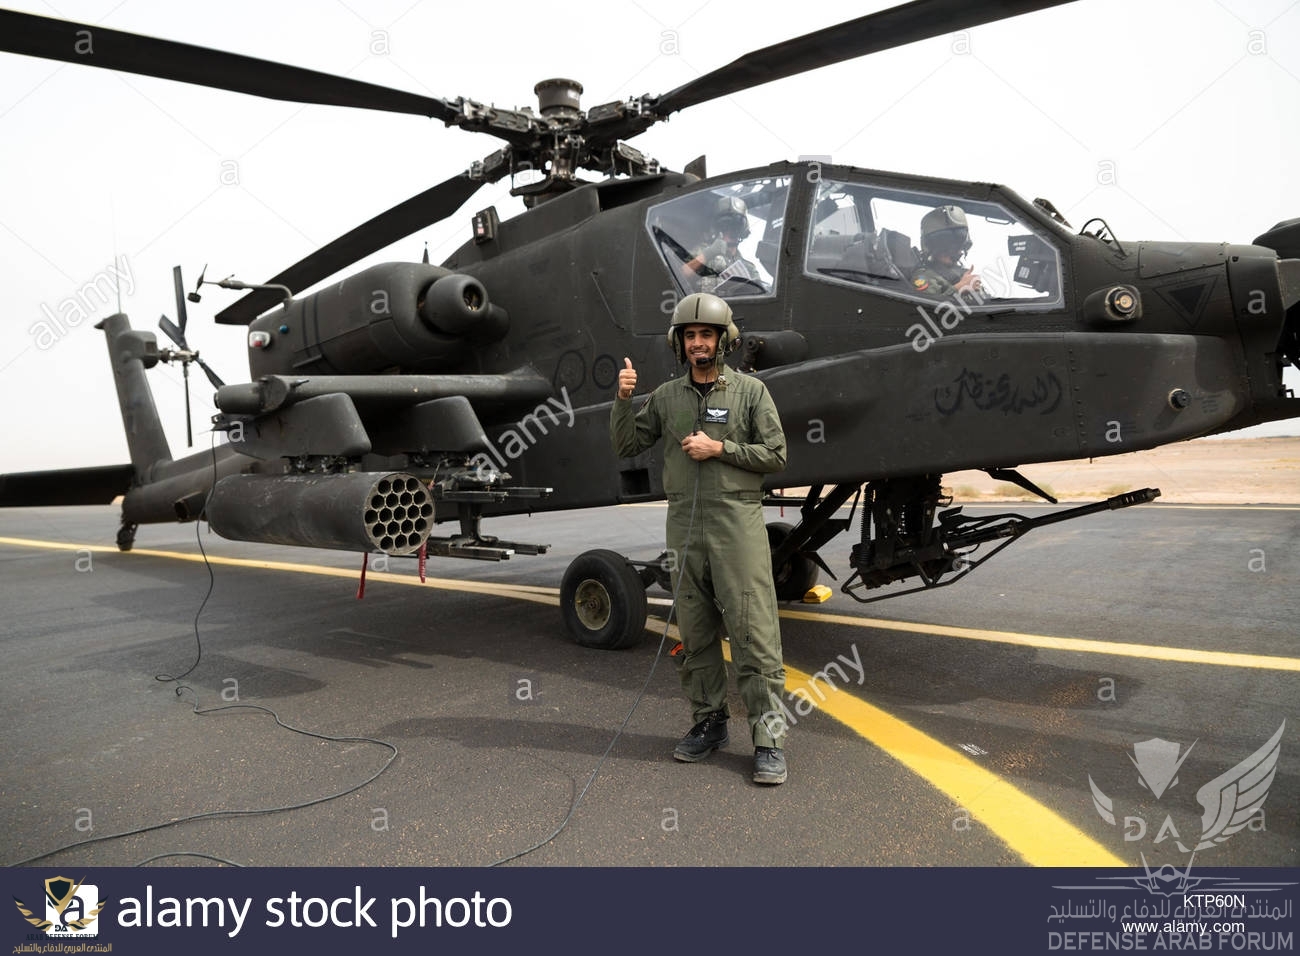 royal-saudi-land-forces-rslf-personnel-from-1st-battalion-3rd-aviation-KTP60N.jpg